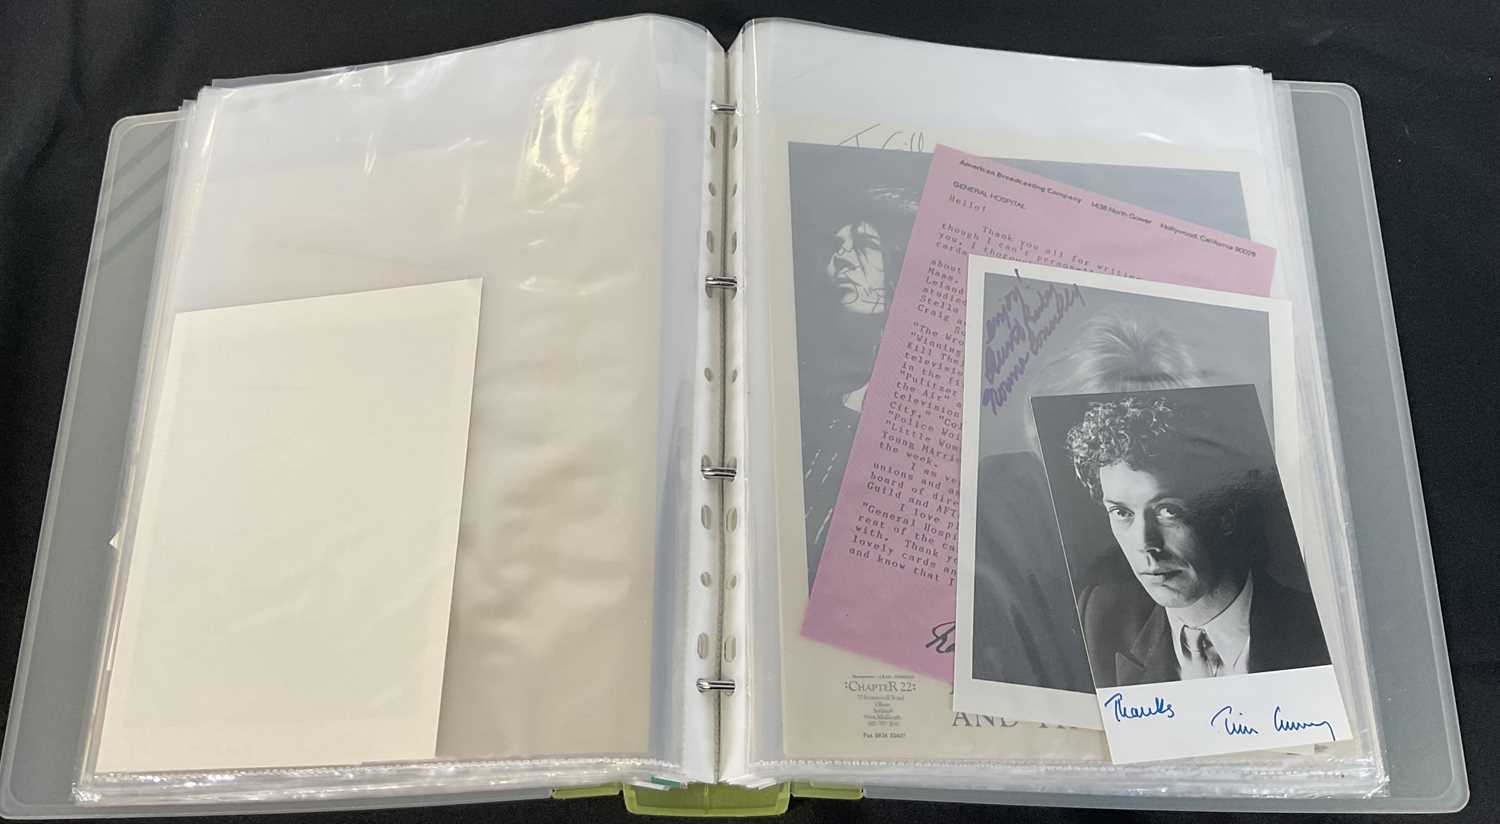 A folder containing 80+ celebrity autographs including sports stars, musicians, actors and TV